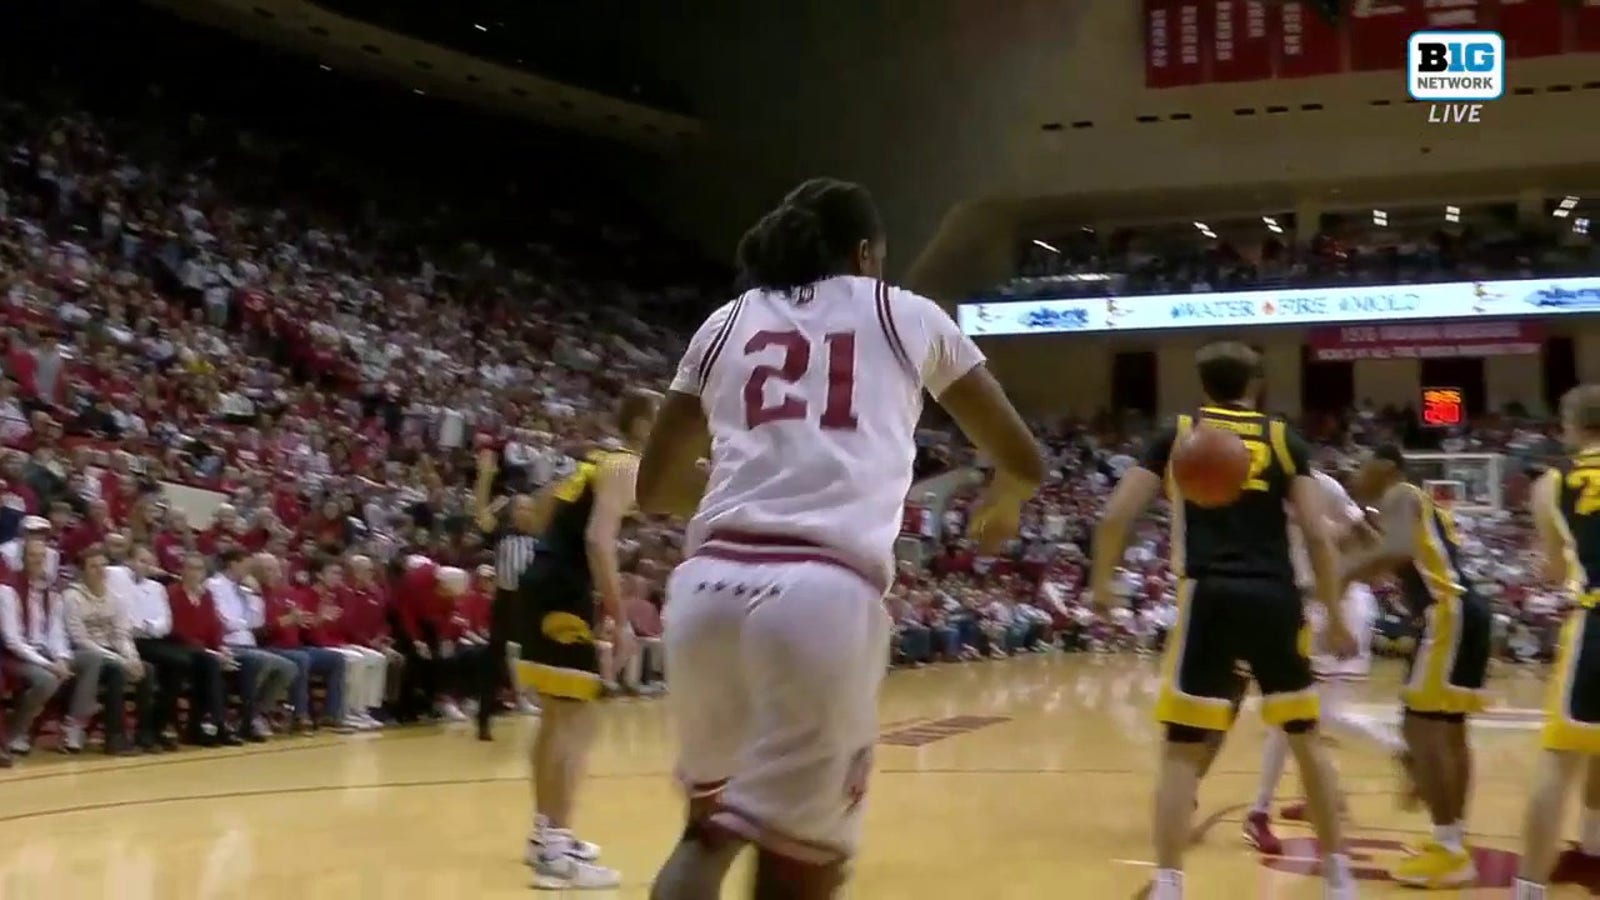 Indiana's Mackenzie Mgbako throws an inbounds pass off an Iowa player's back, picks it up and scores